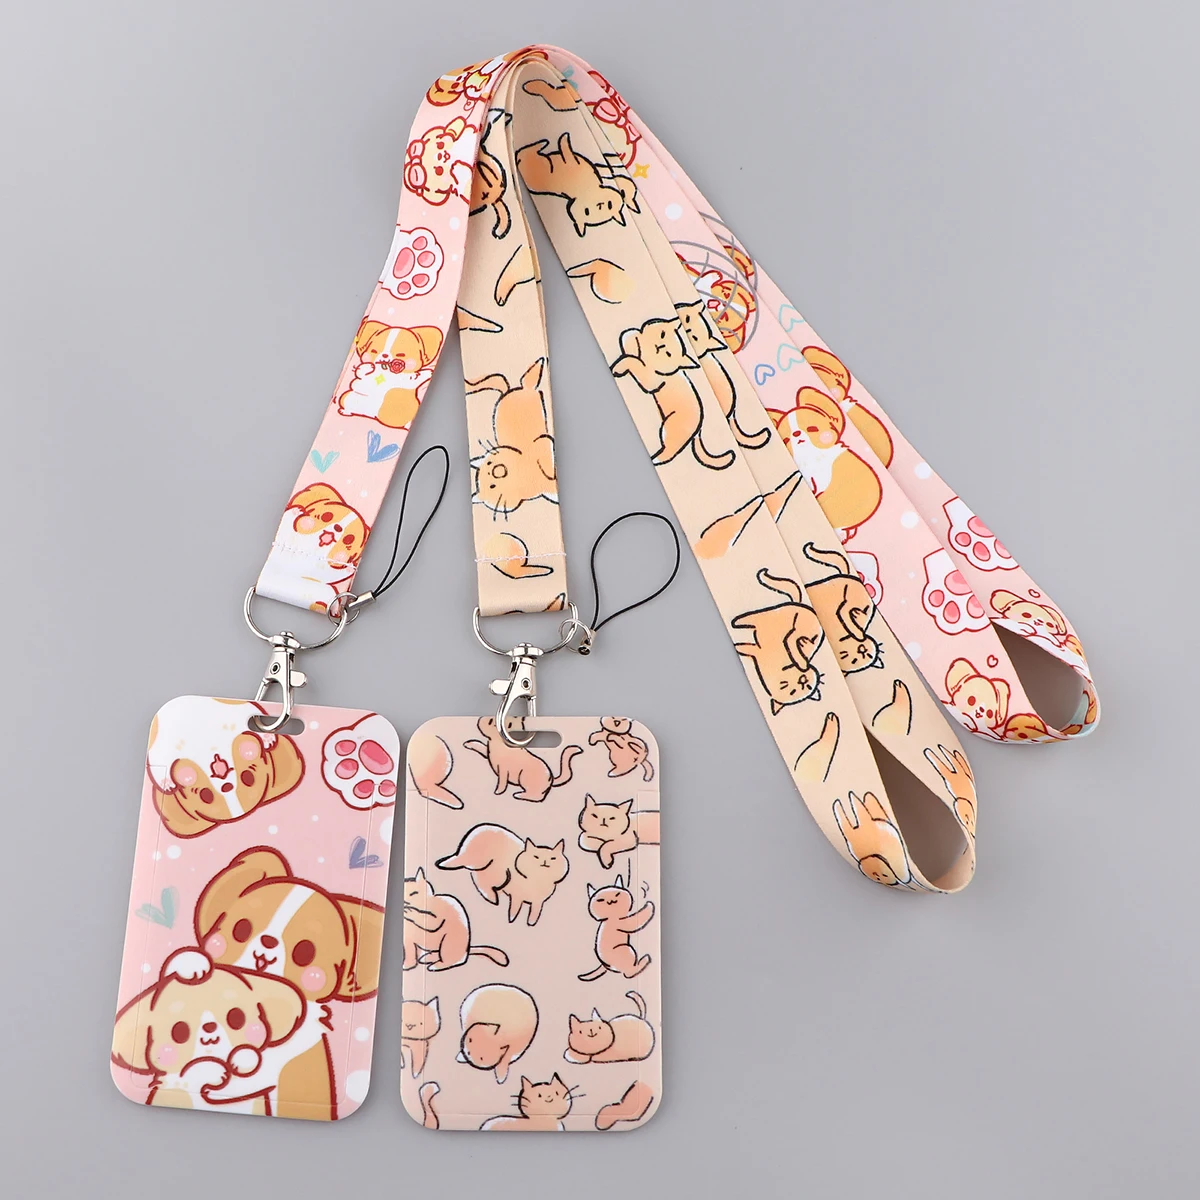 Cute Corgi Dog Lanyard Kawaii Cat Neck Strap for key ID Card Cellphone Straps Badge Holder DIY Hanging Rope Neckband Accessories cute flower little daisy lanyard neck strap for key id card cell phone straps badge holder diy hanging rope neckband accessories